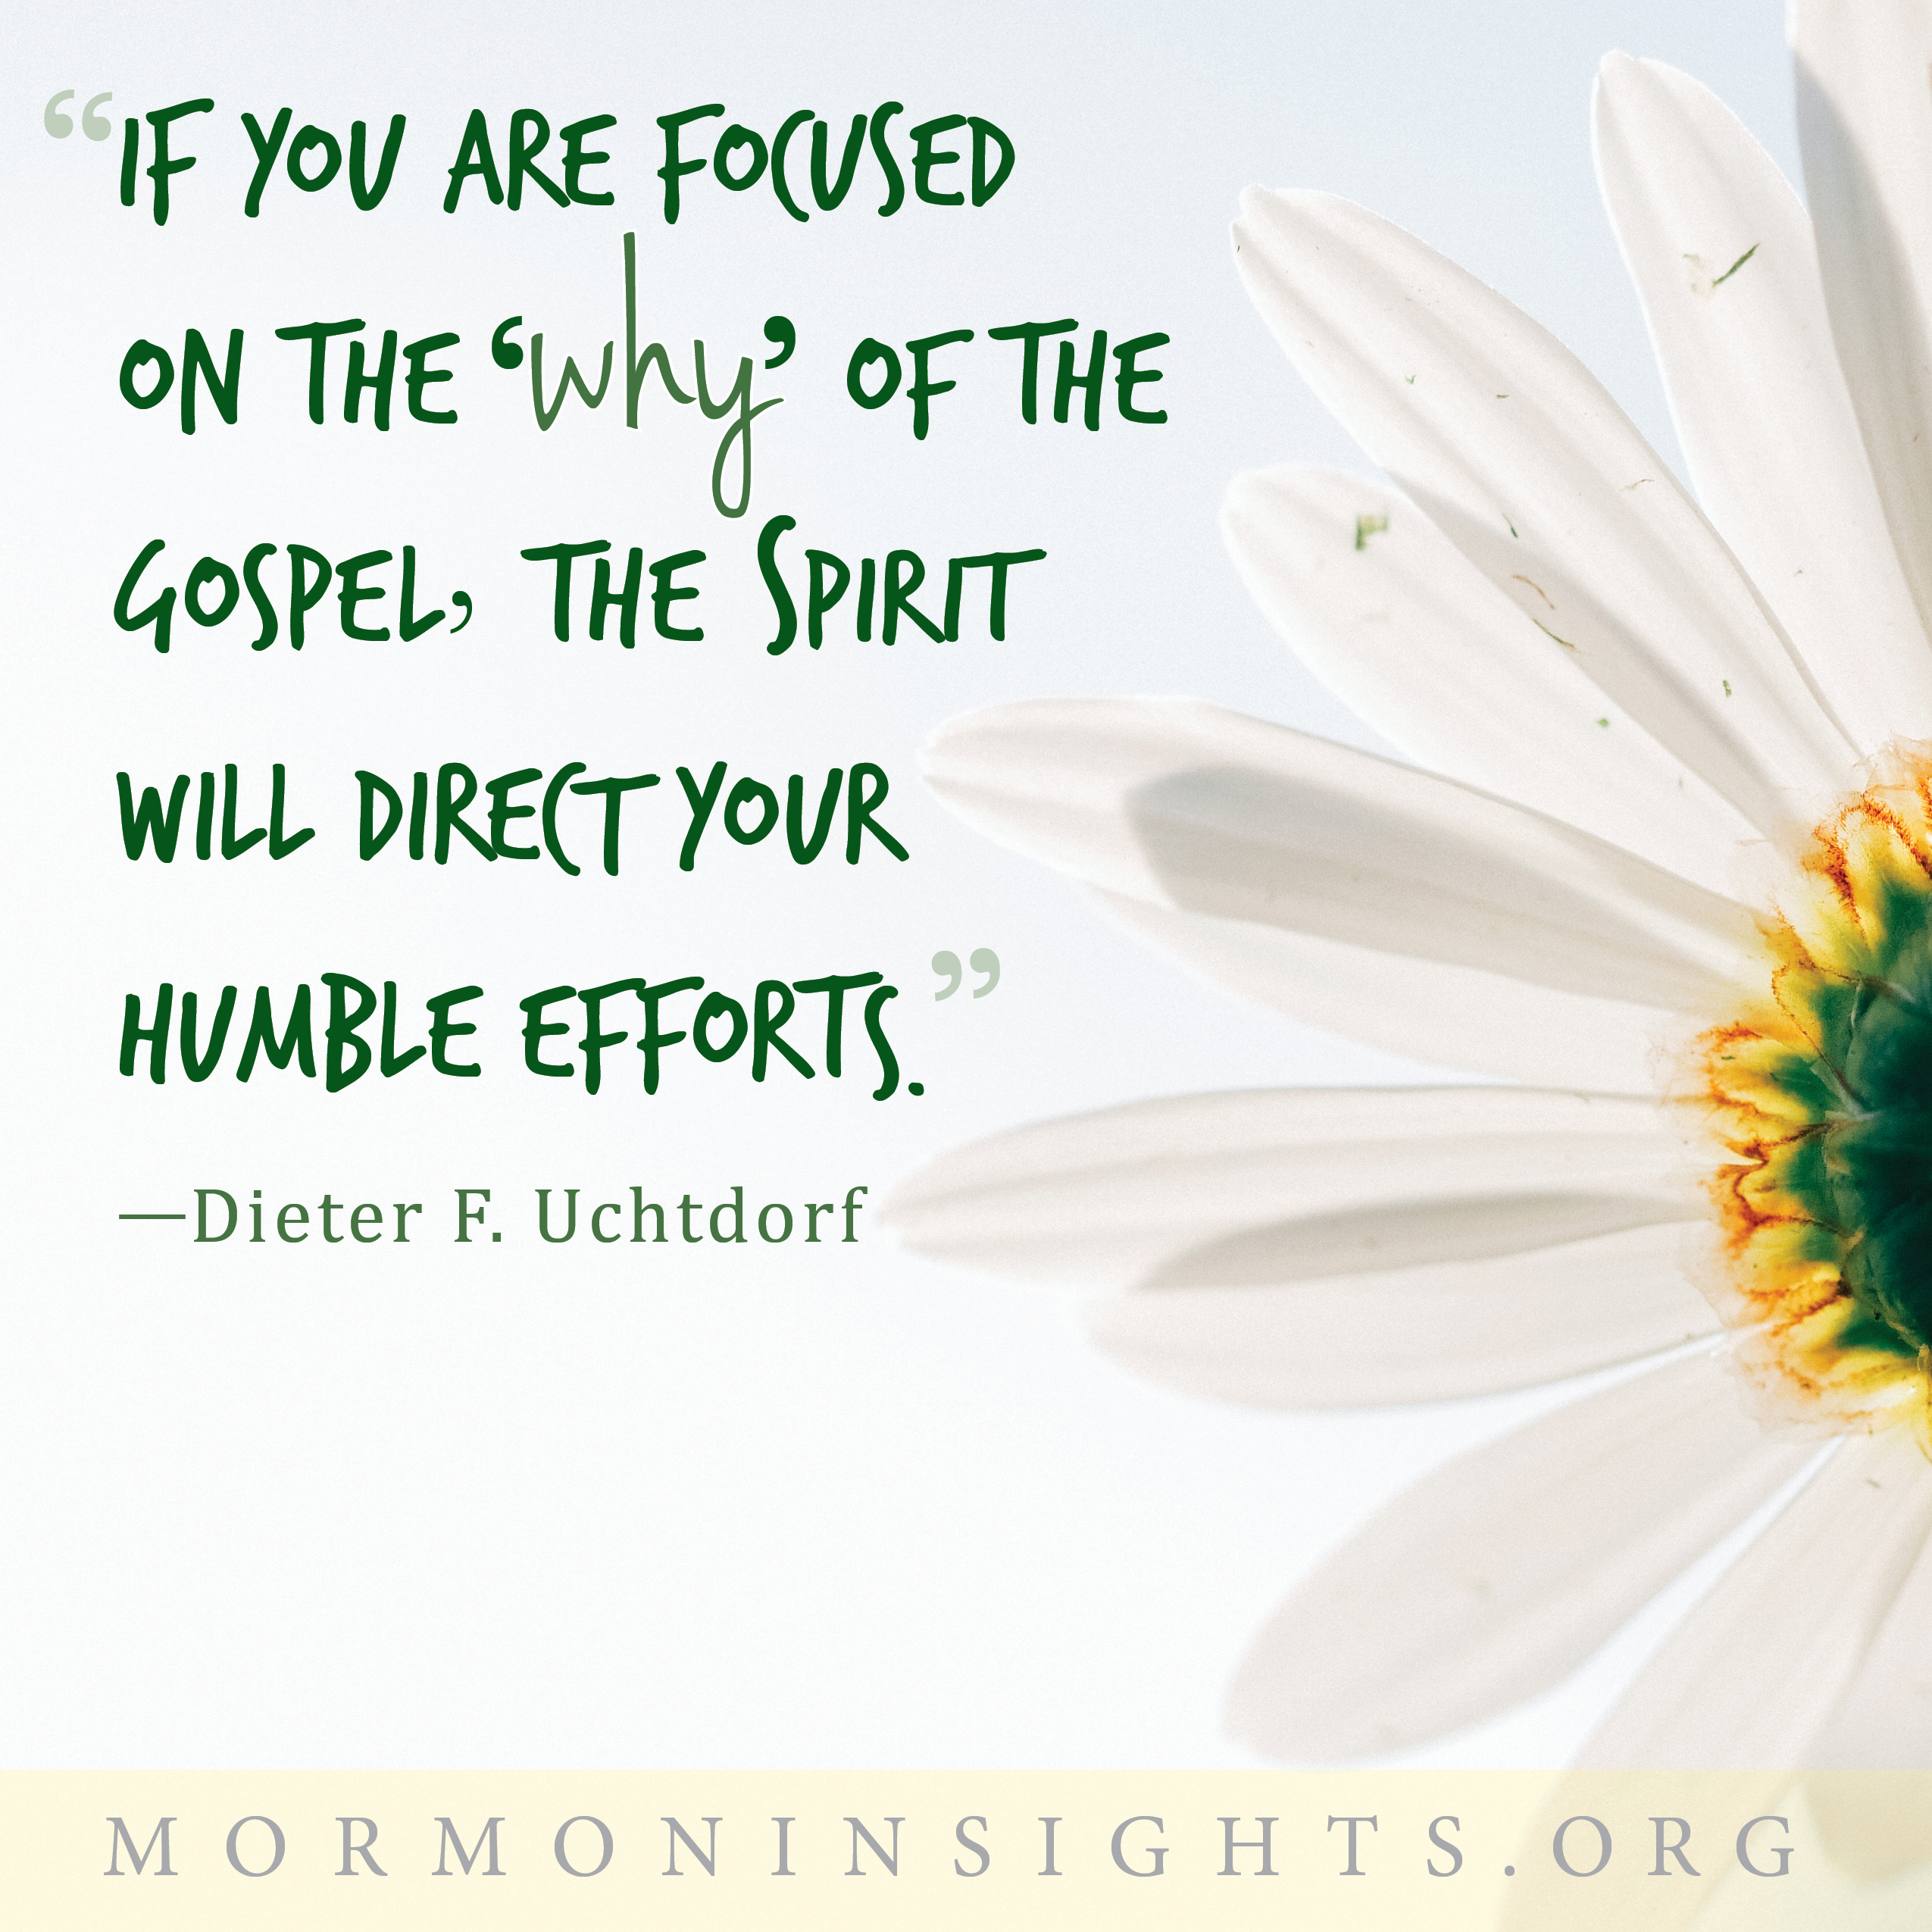 "If you are focused on the 'why' of the gospel, the spirit will direct your humble efforts." Dieter F. Uchtdorf